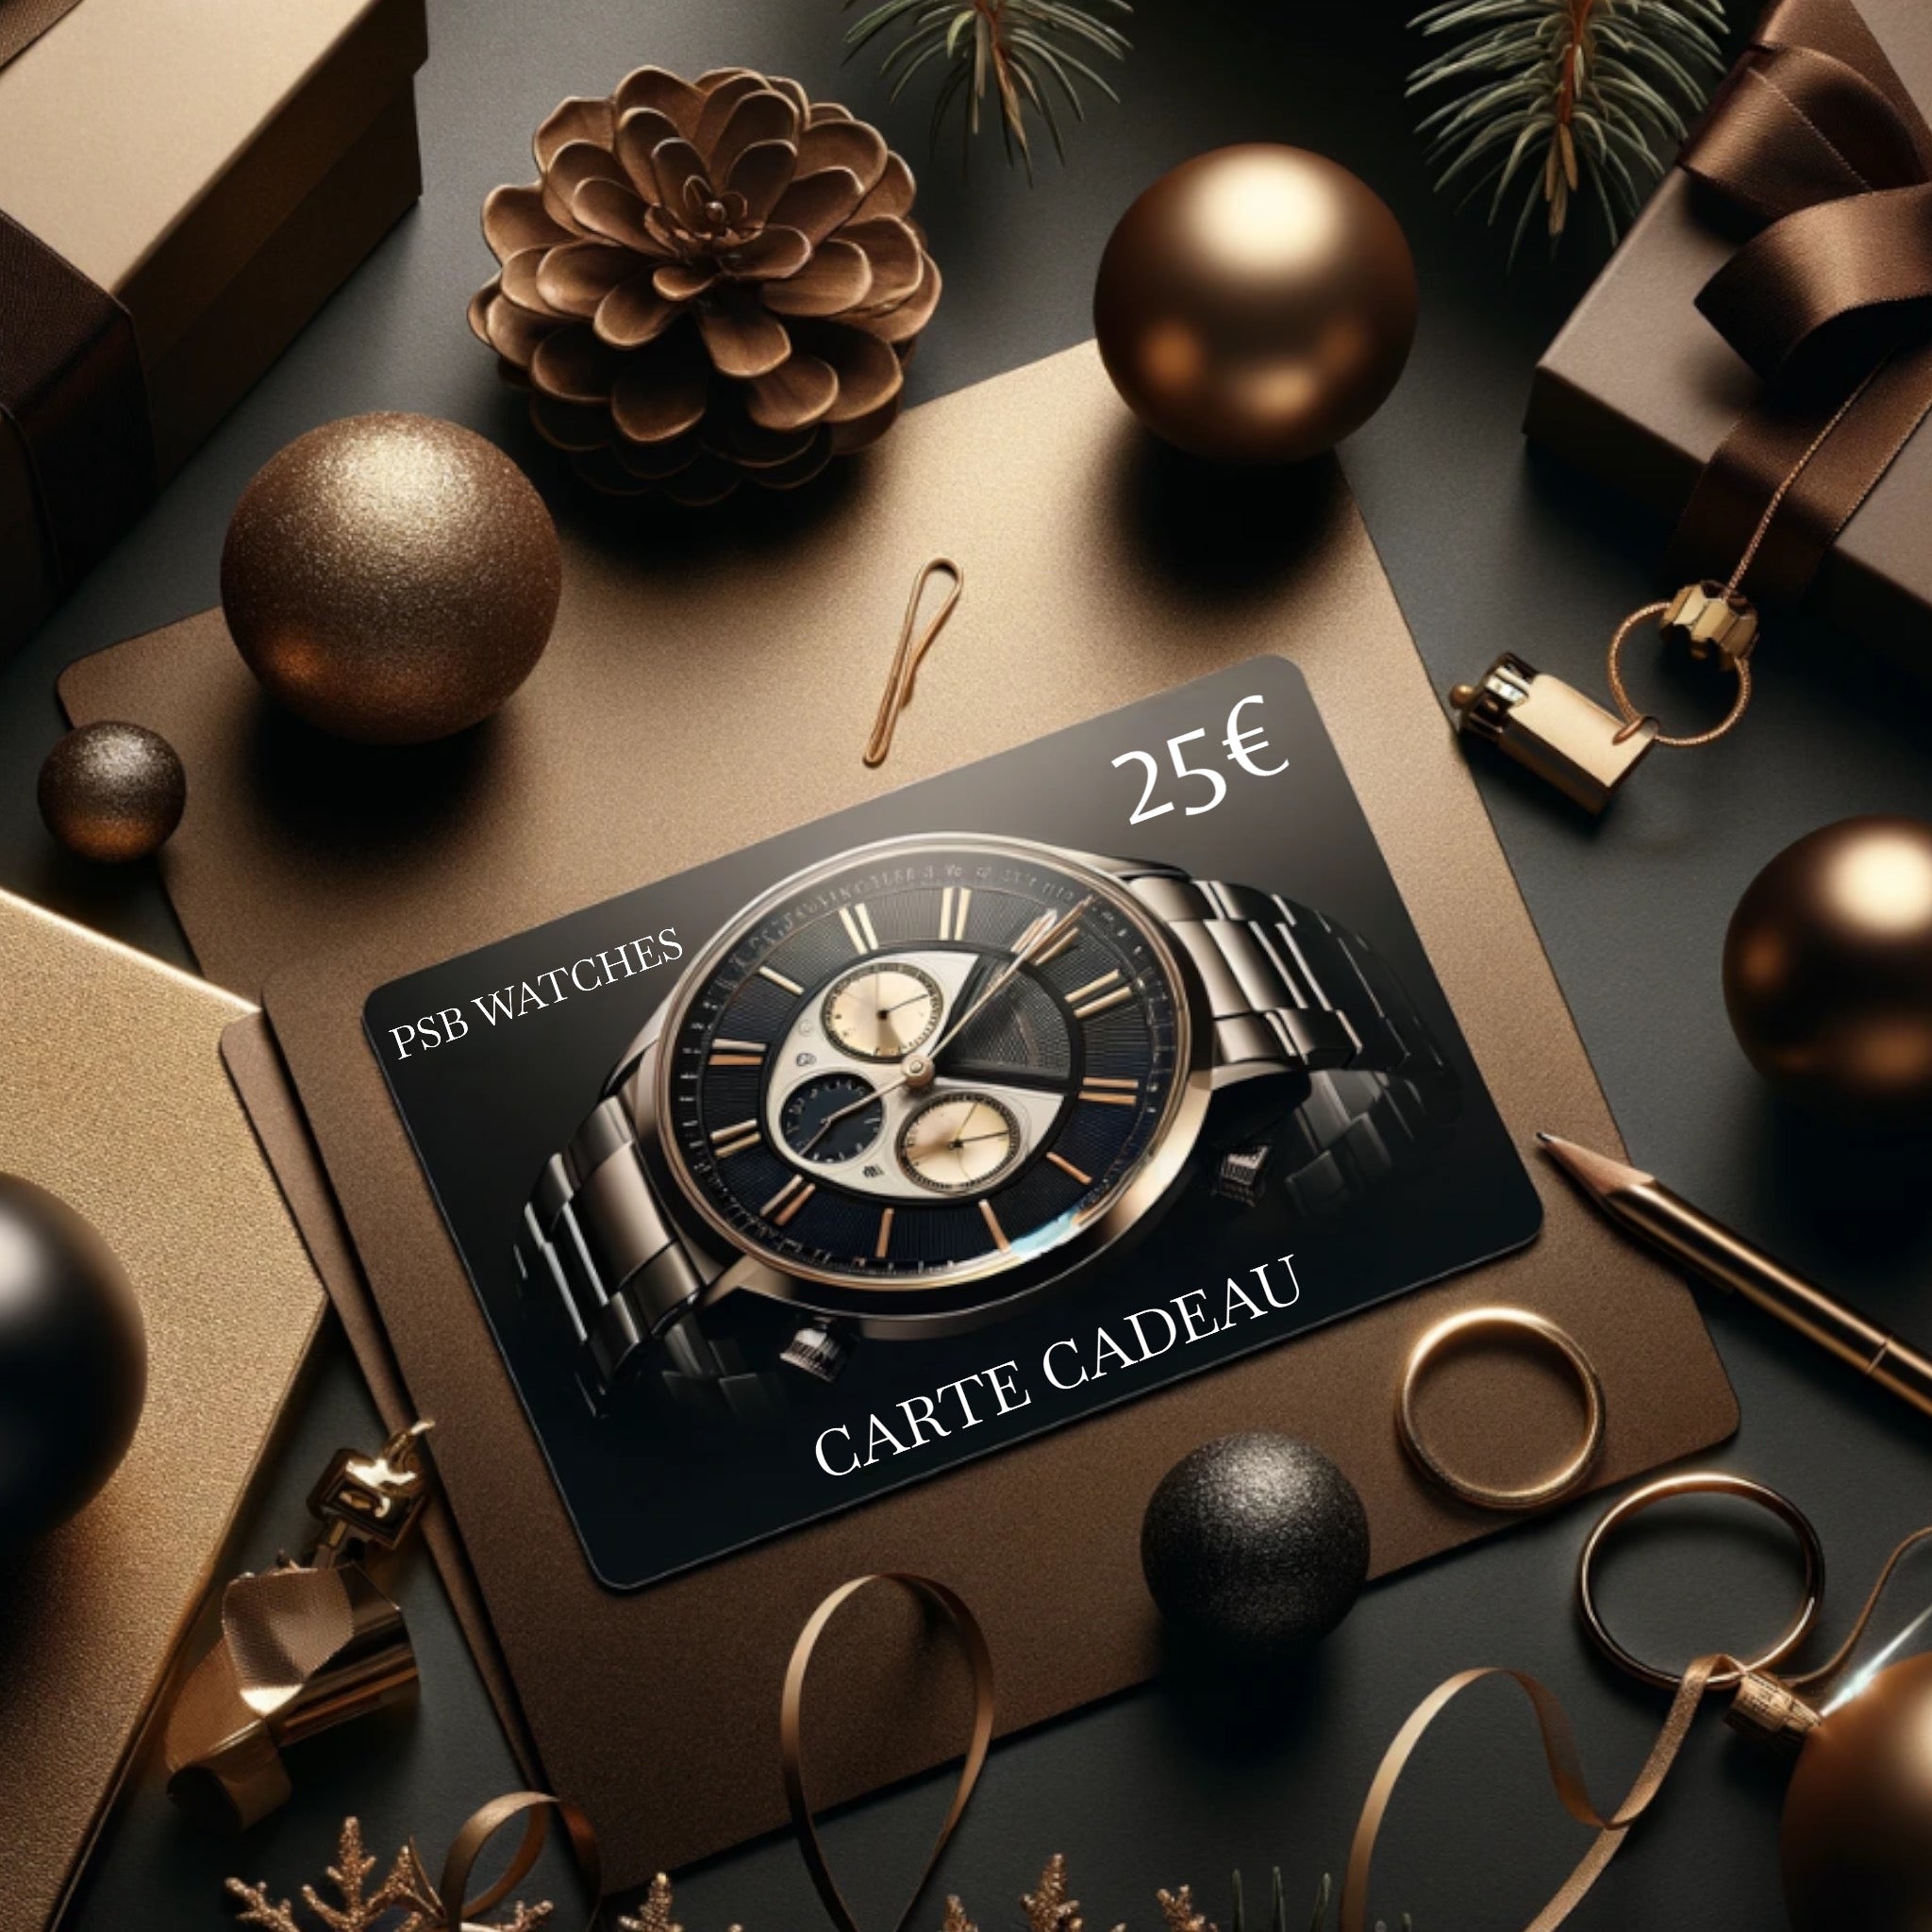 PSB WATCHES gift card